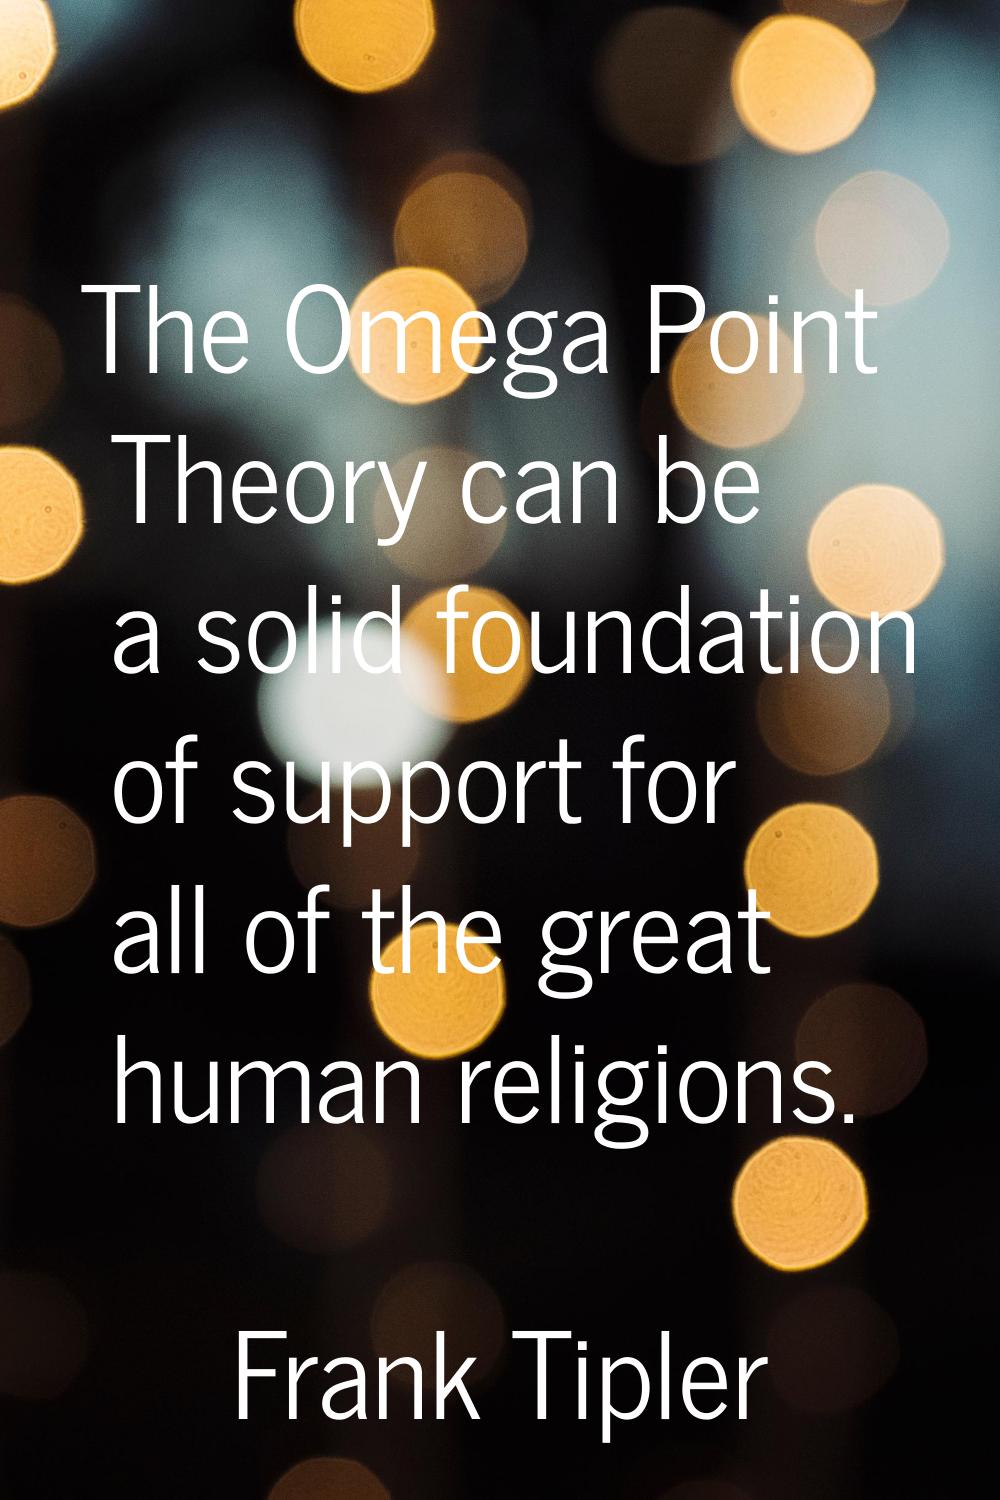 The Omega Point Theory can be a solid foundation of support for all of the great human religions.